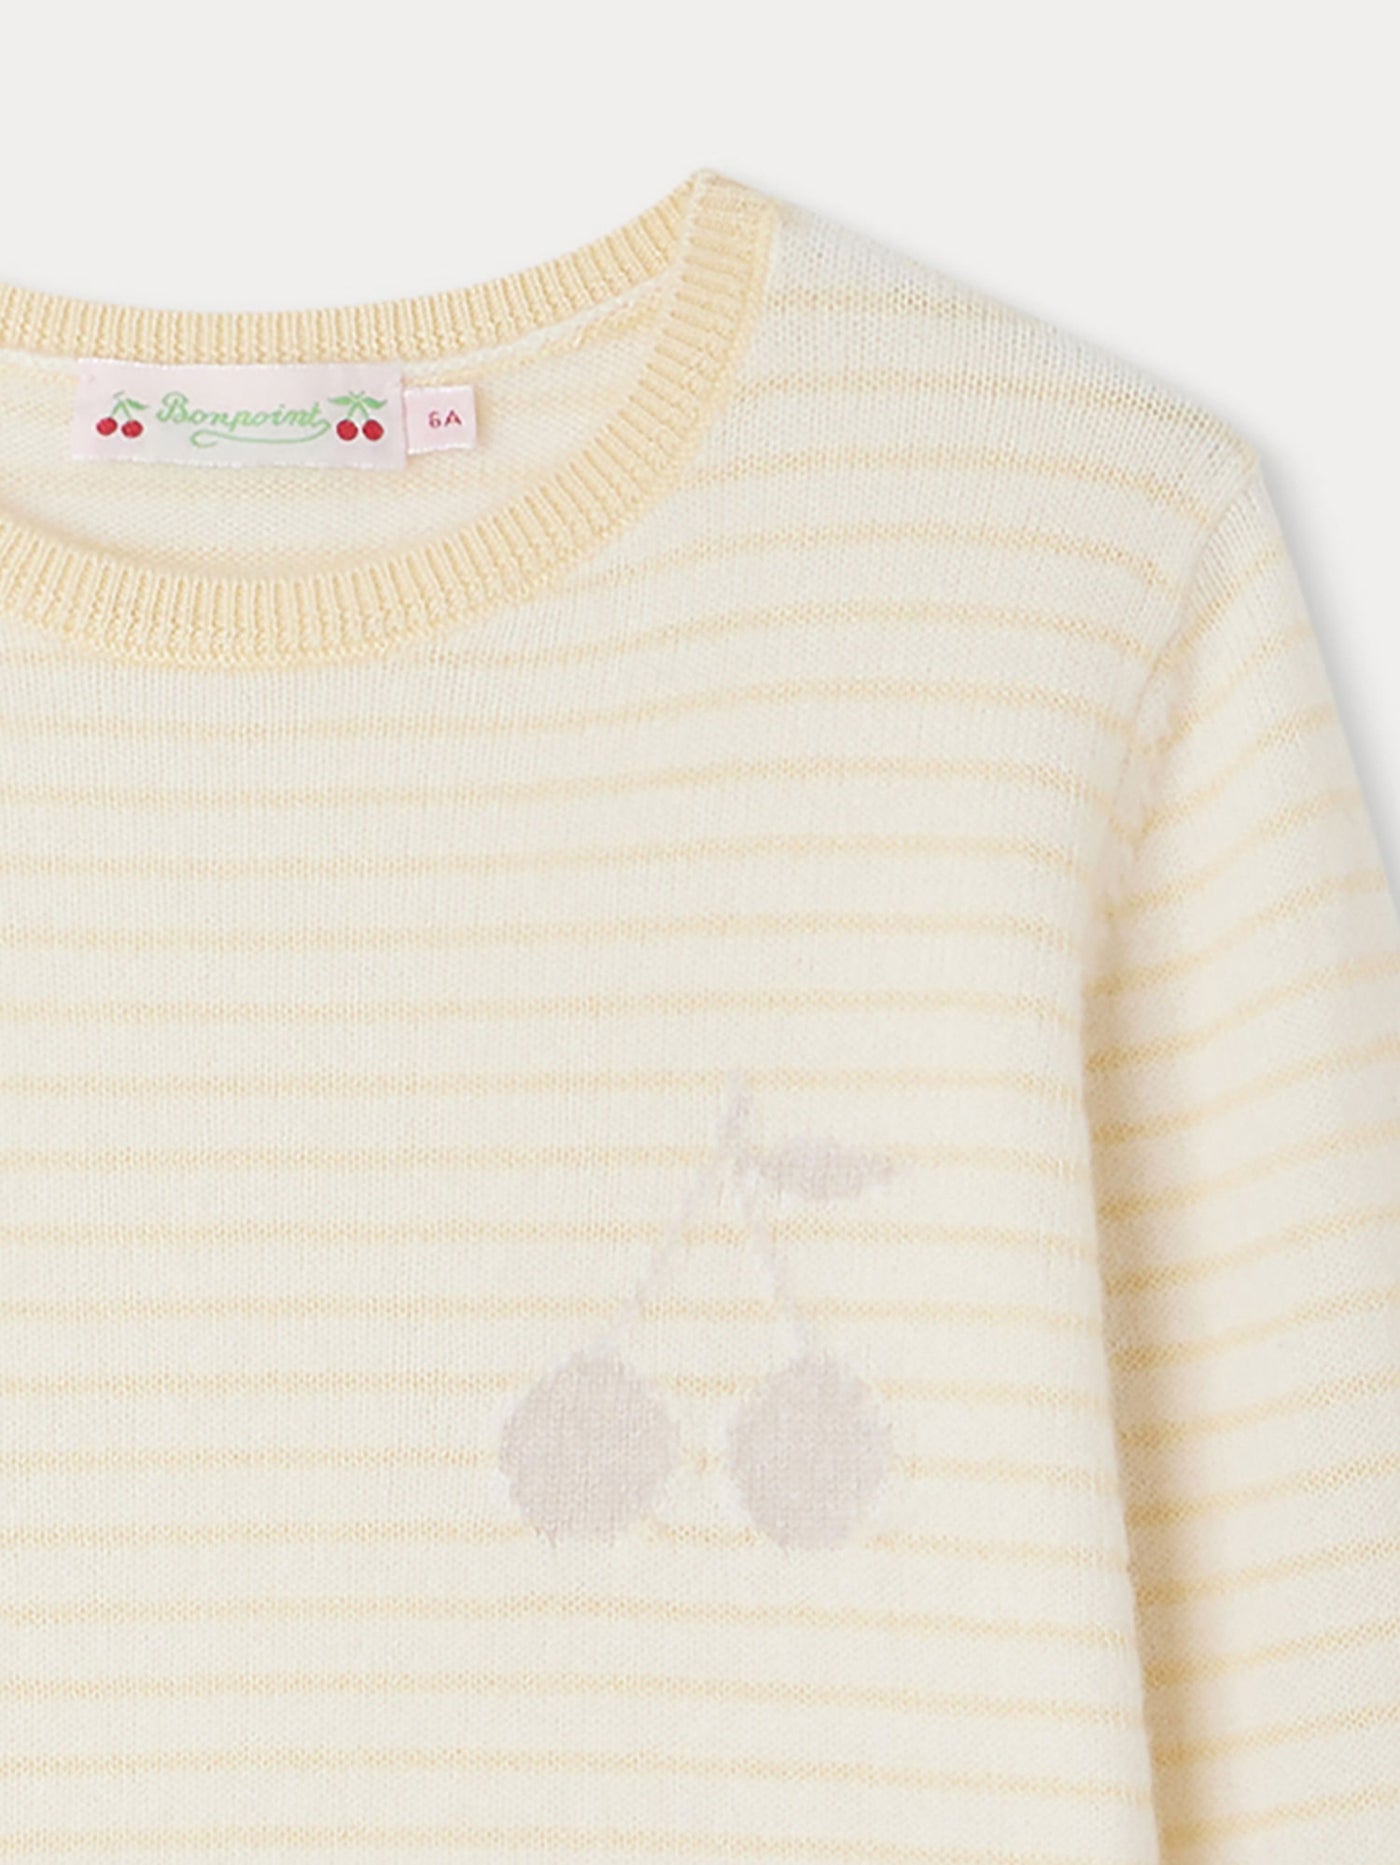 Brunelle Sweater pale yellow